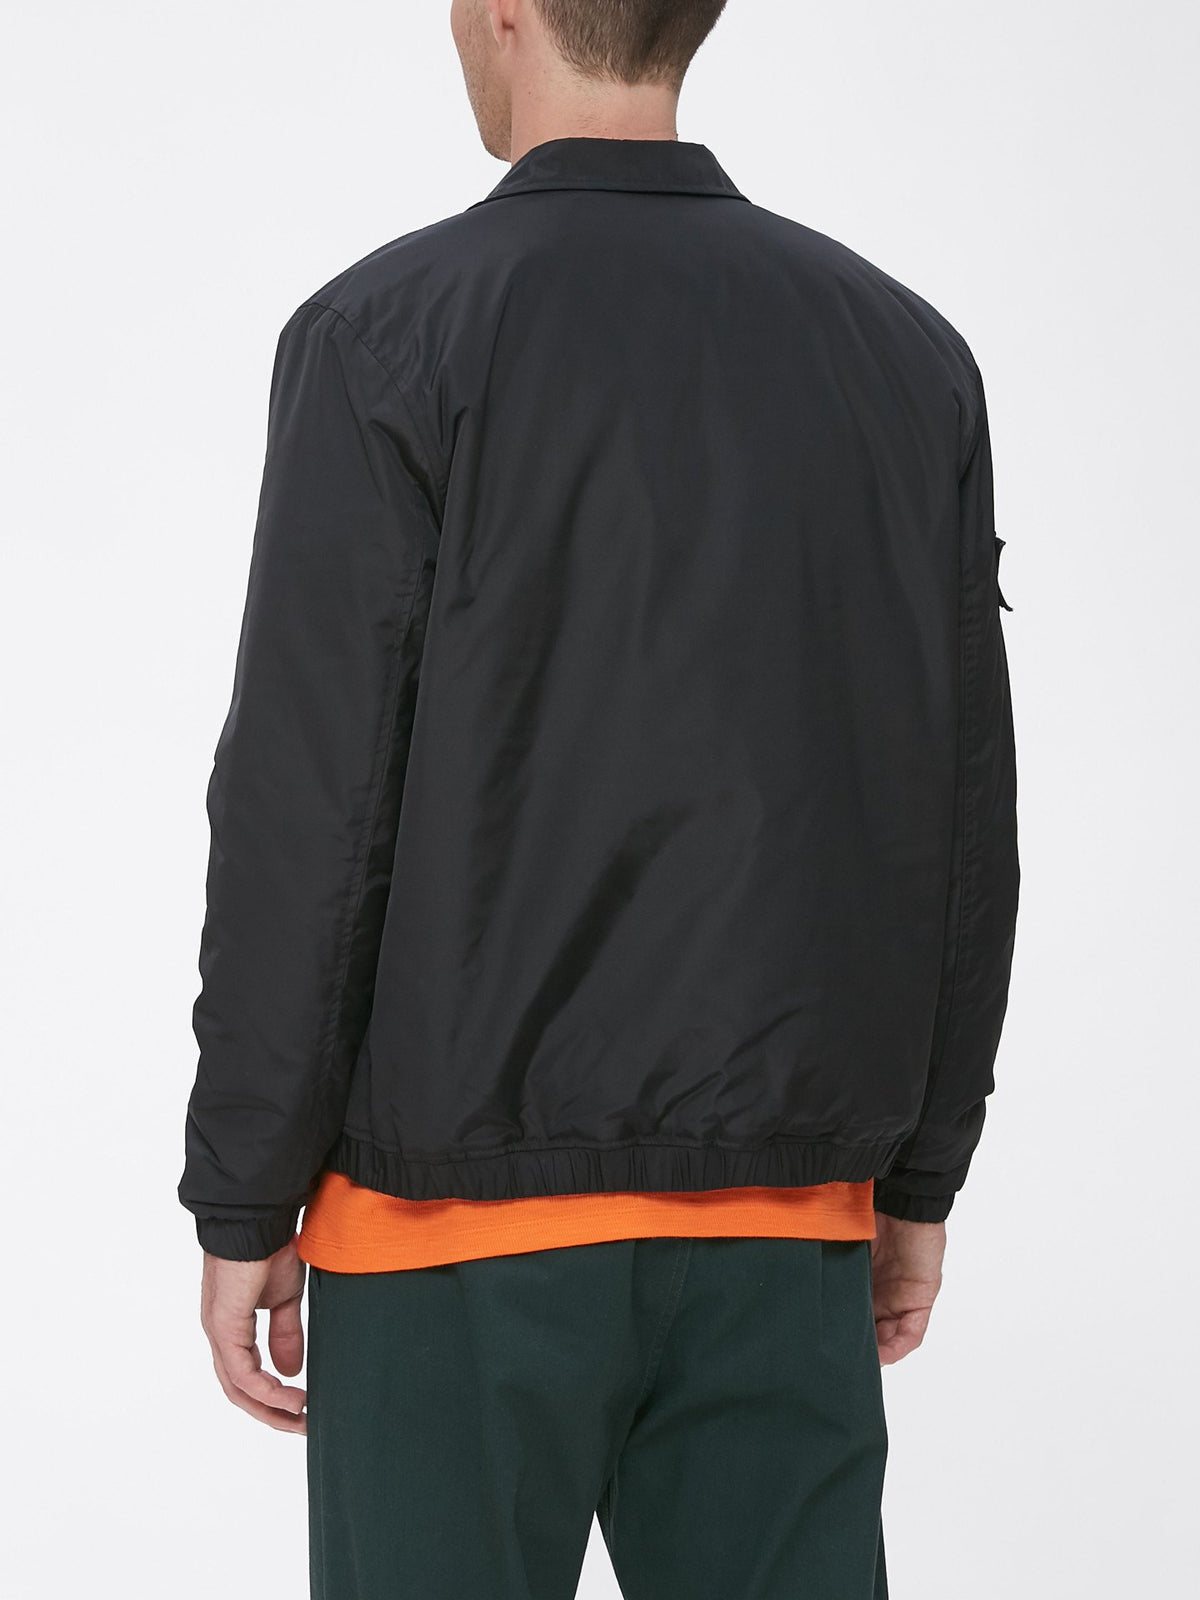 OBEY - Mission Men's Jacket, Black - The Giant Peach